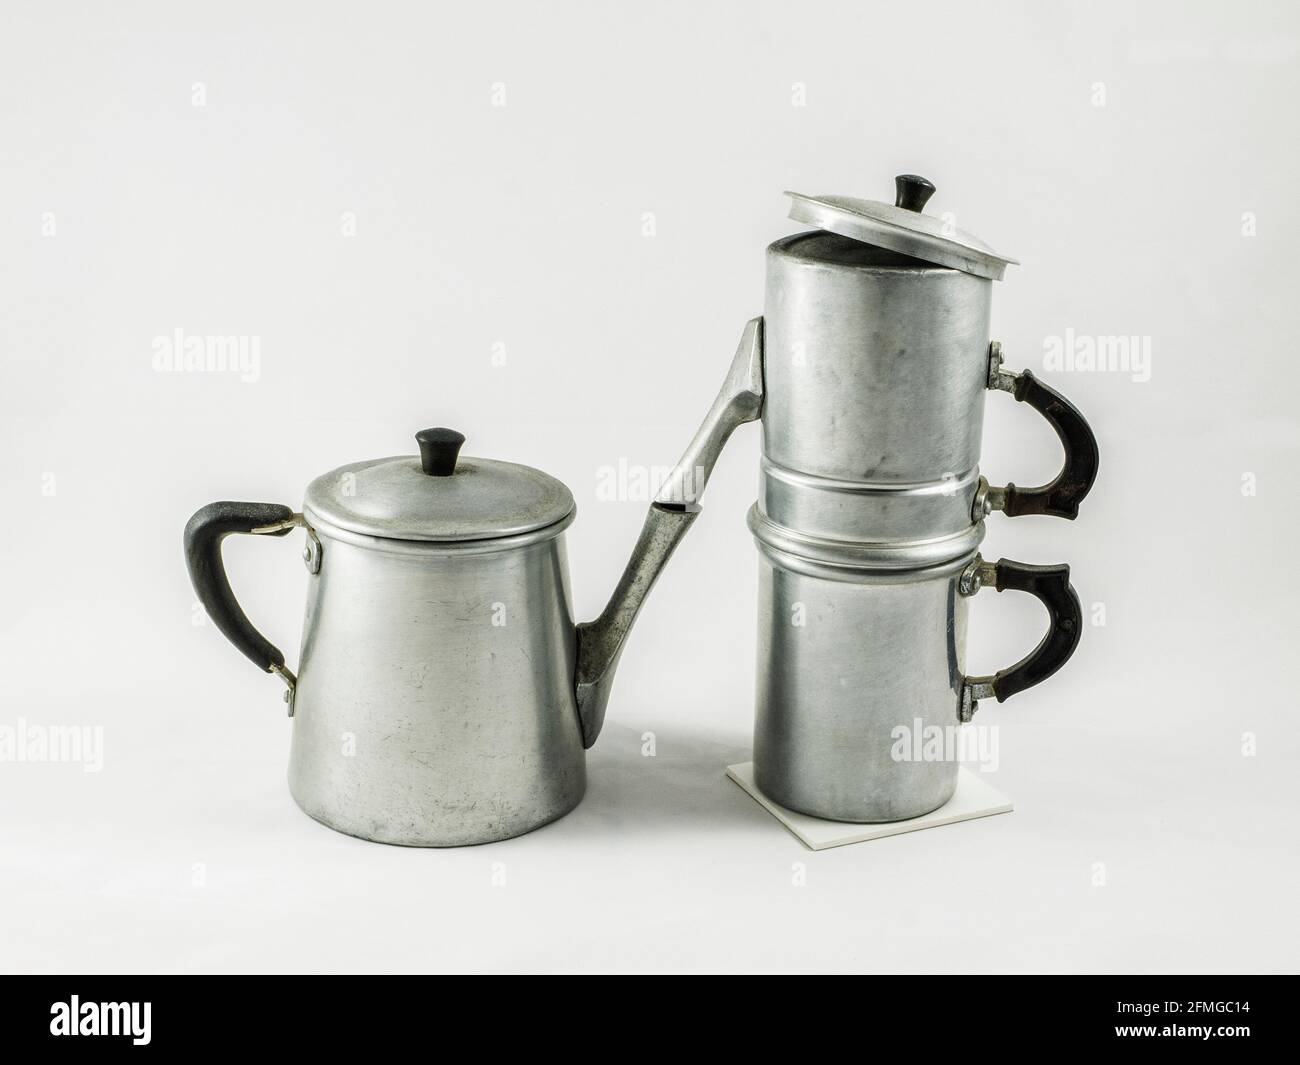 https://c8.alamy.com/comp/2FMGC14/antique-aluminum-containers-for-the-kitchen-a-milk-jug-and-a-neapolitan-coffee-pot-2FMGC14.jpg